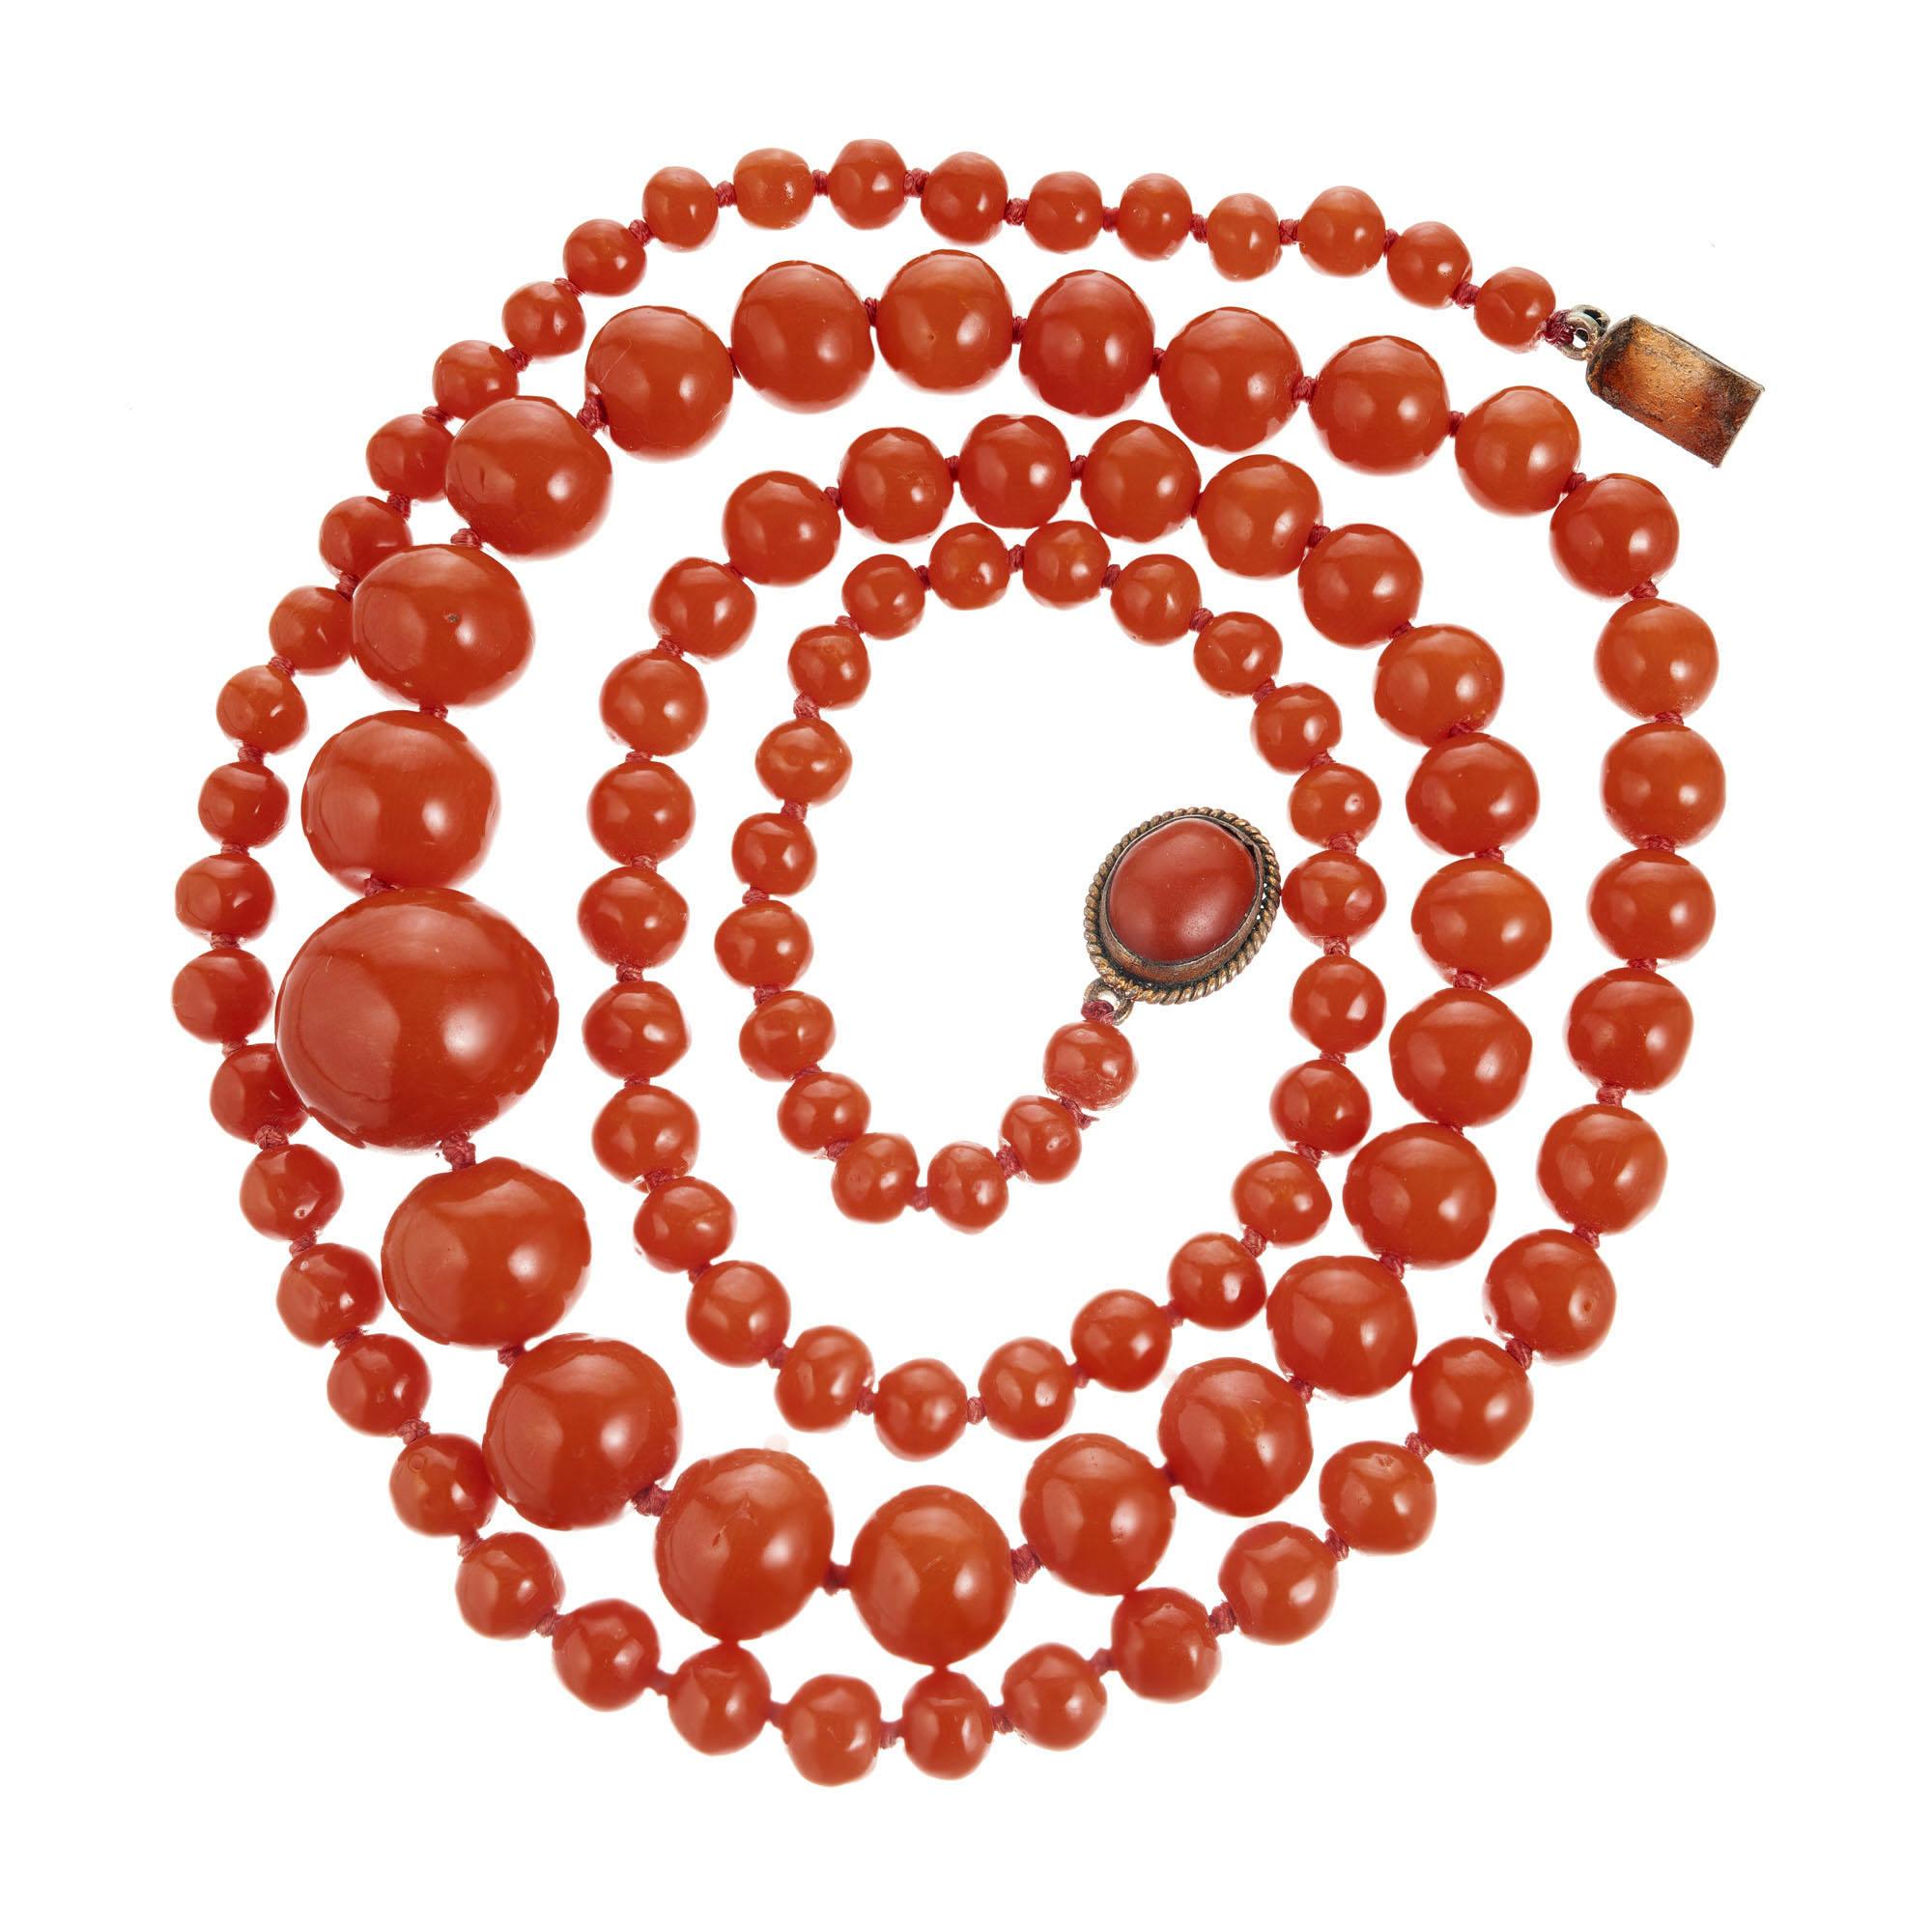 Victorian 1900's all natural orange color well polished Coral necklace. GIA Certified.

105, 13.9 to 5.6mm orange natural color well polished Coral beads. No Dye detected. GIA certificate#2155011.
Yellow metal catch with 9 x 7mm oval natural